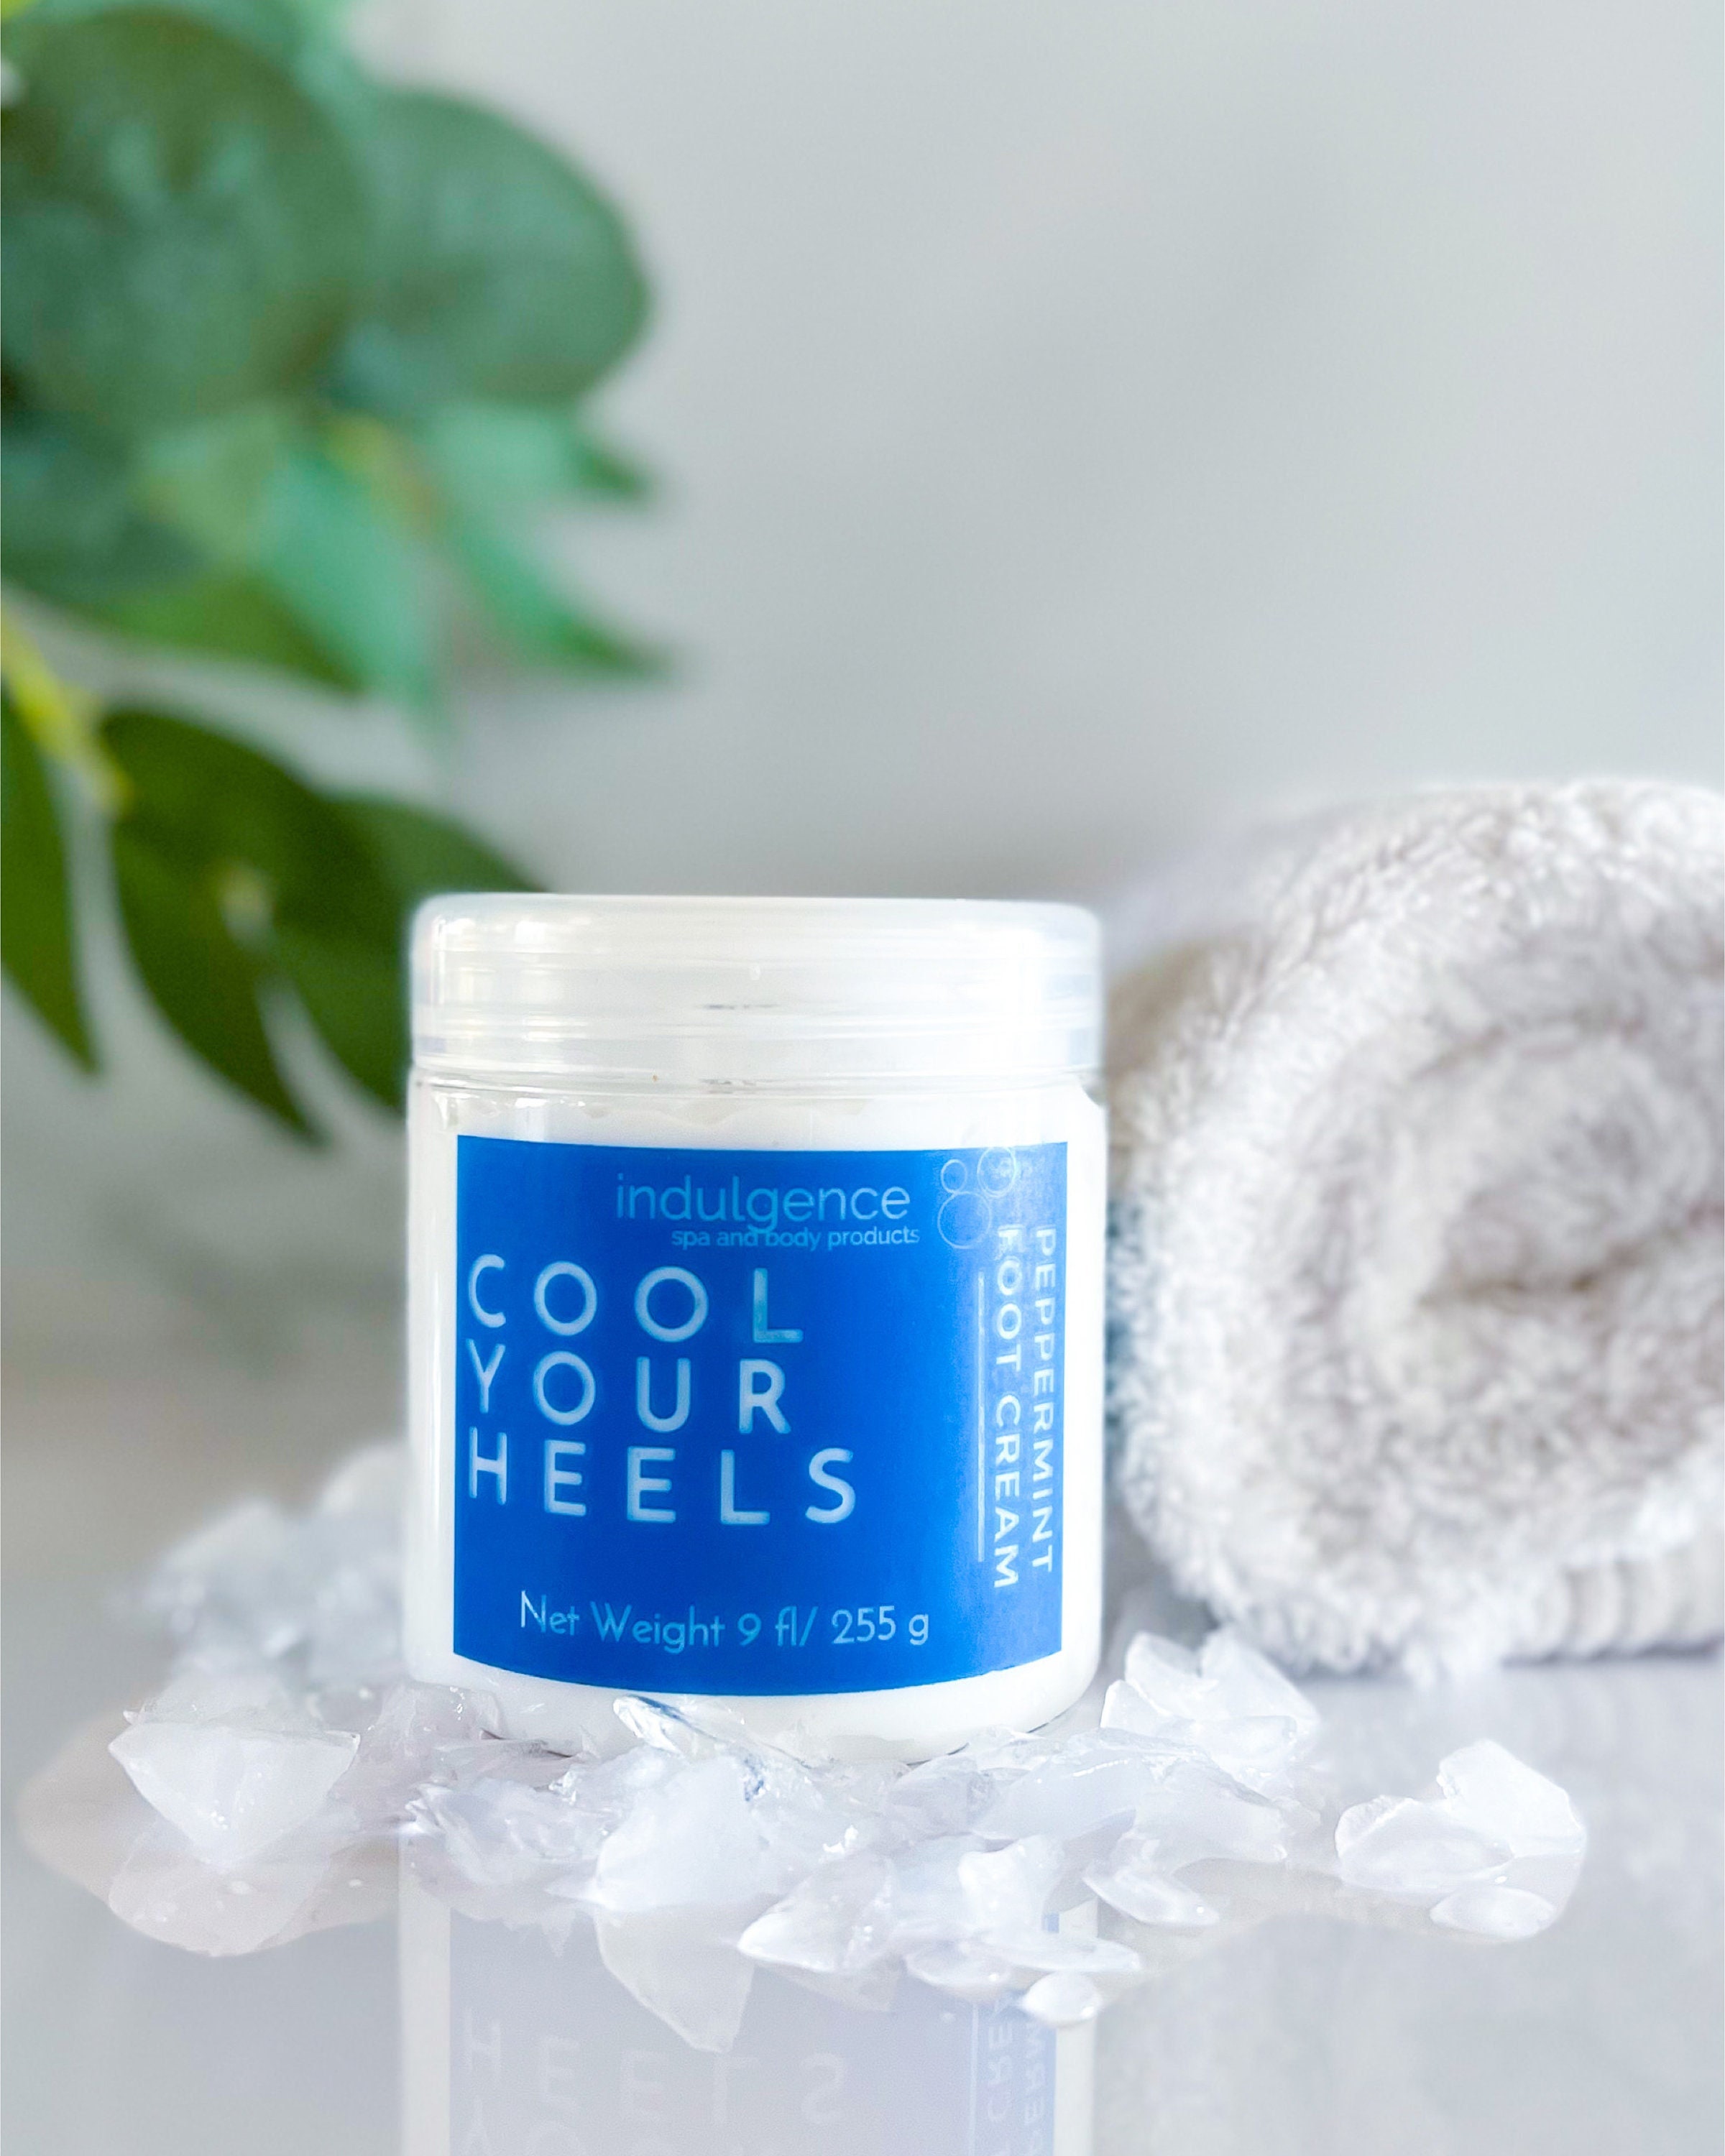 Cool Your Heels – Indulgence Spa and Body Products